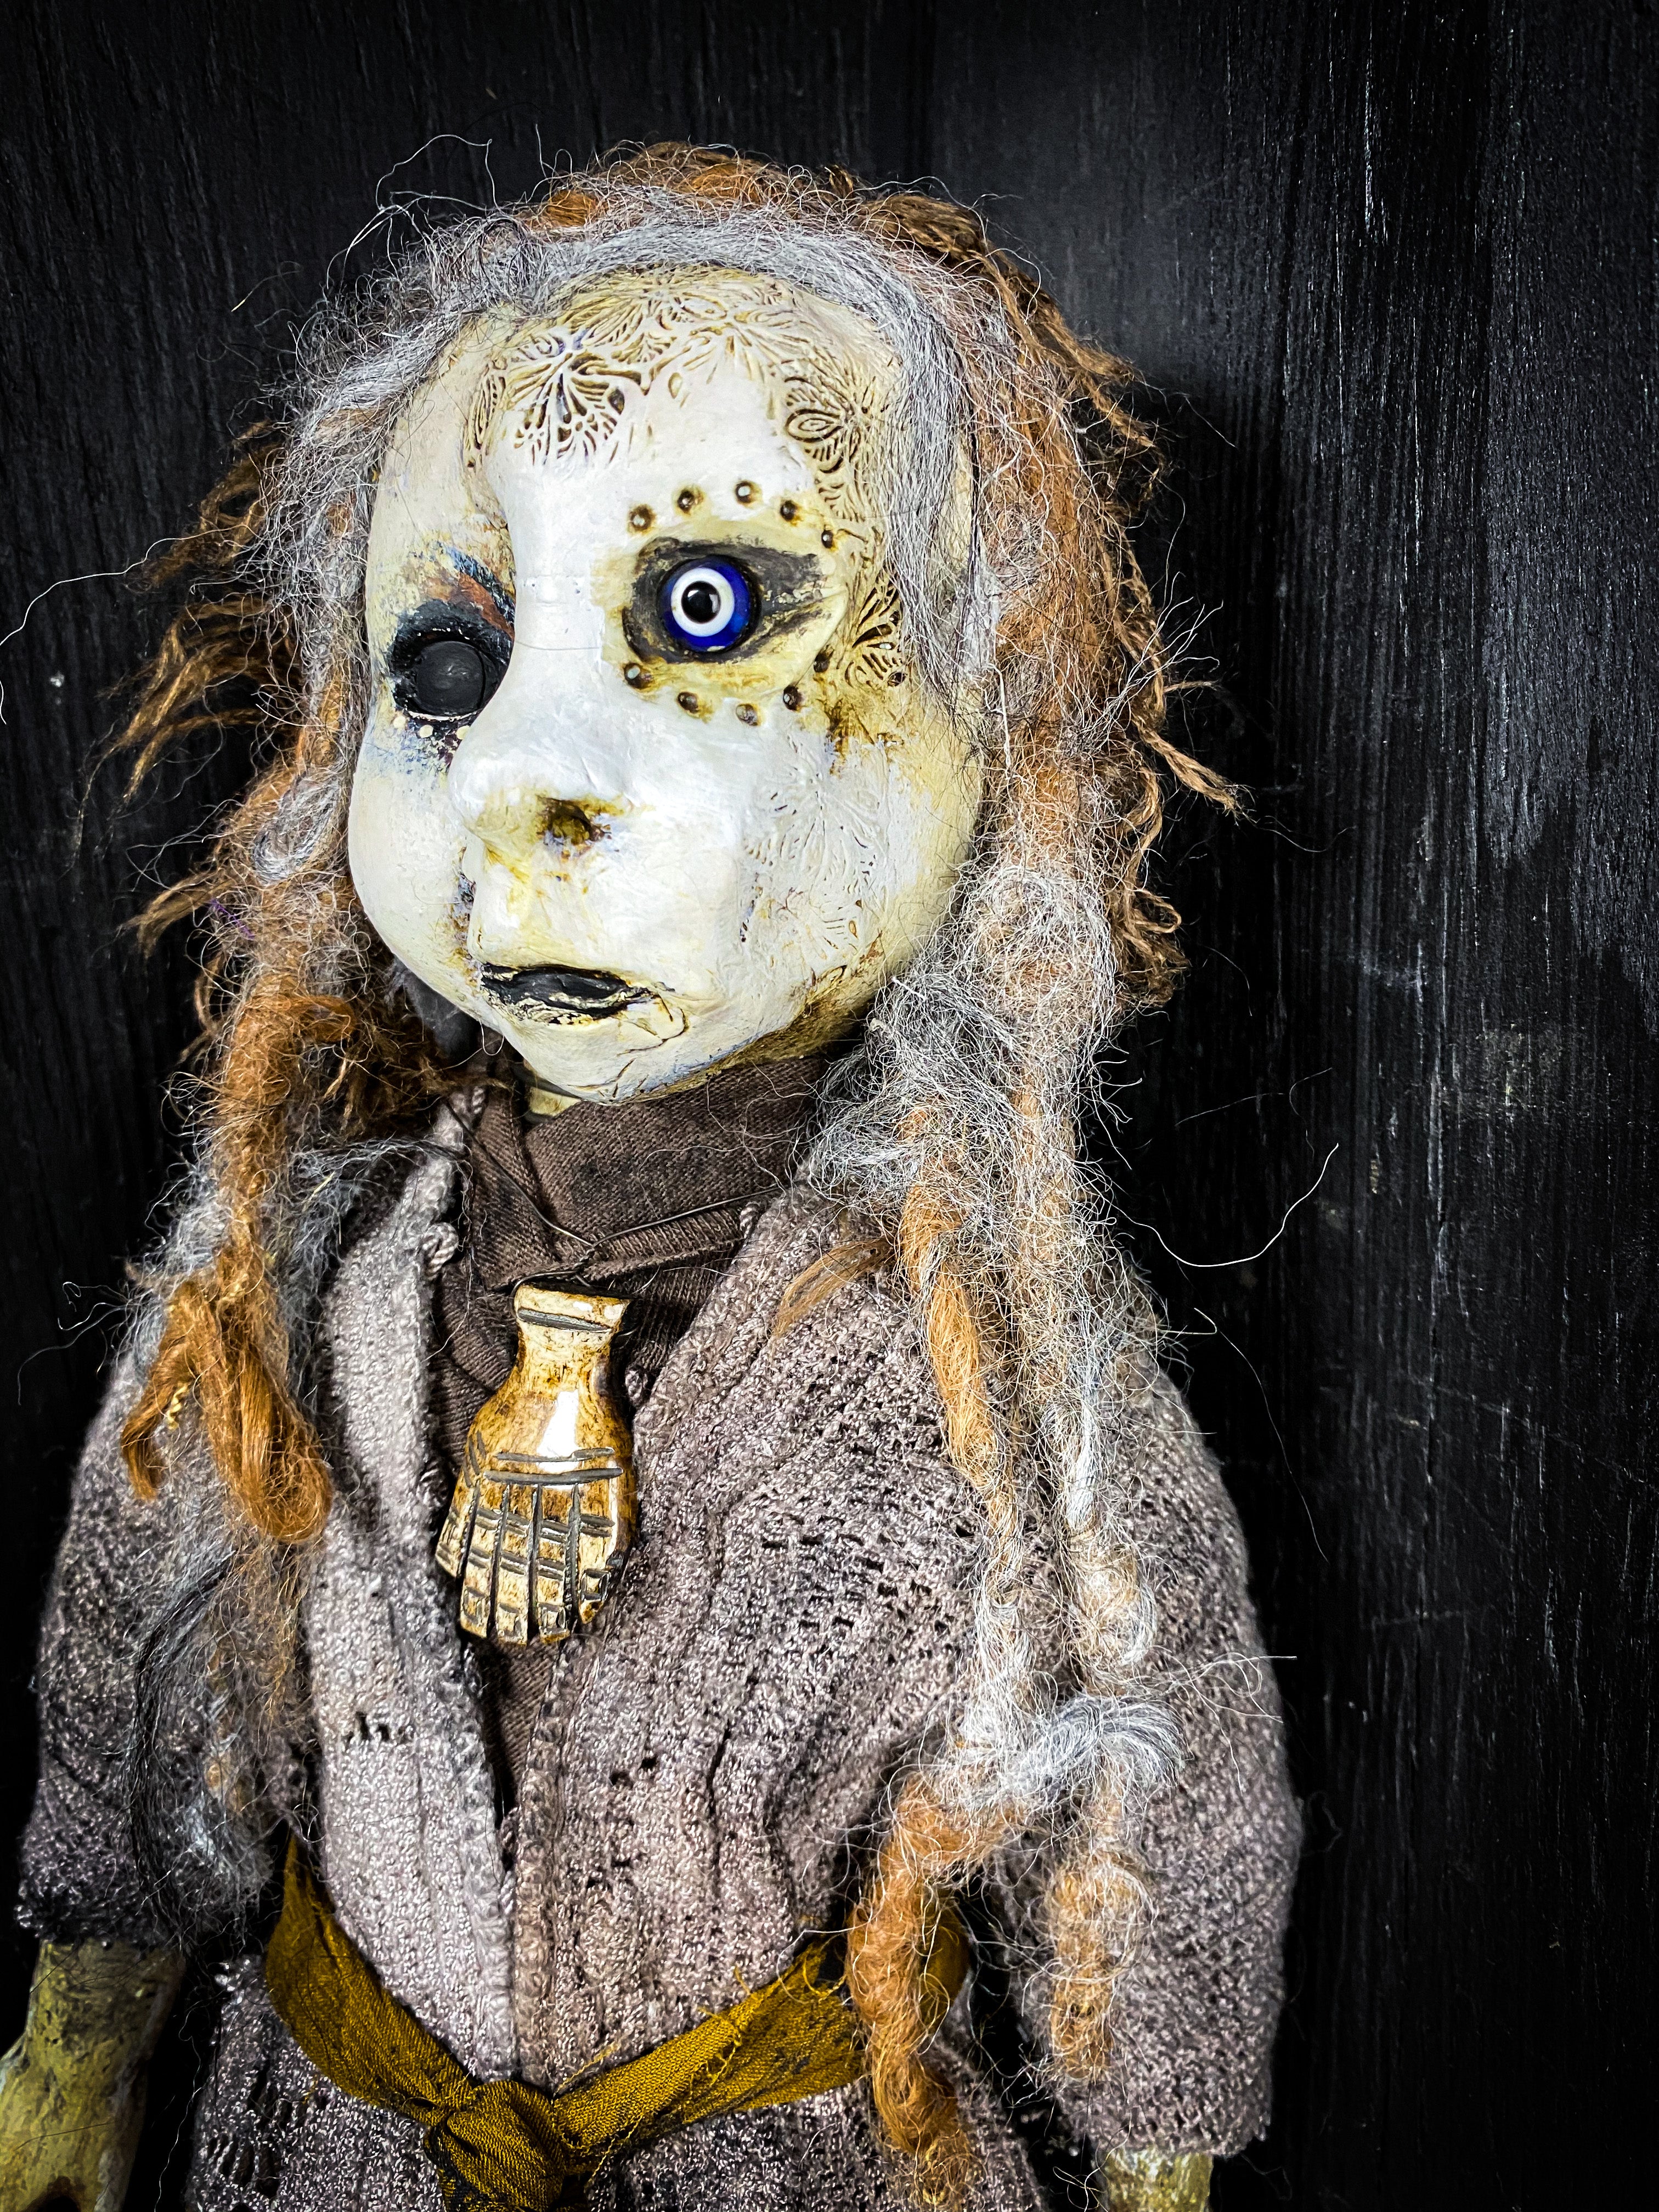 THE ORACLE - Spirit Doll